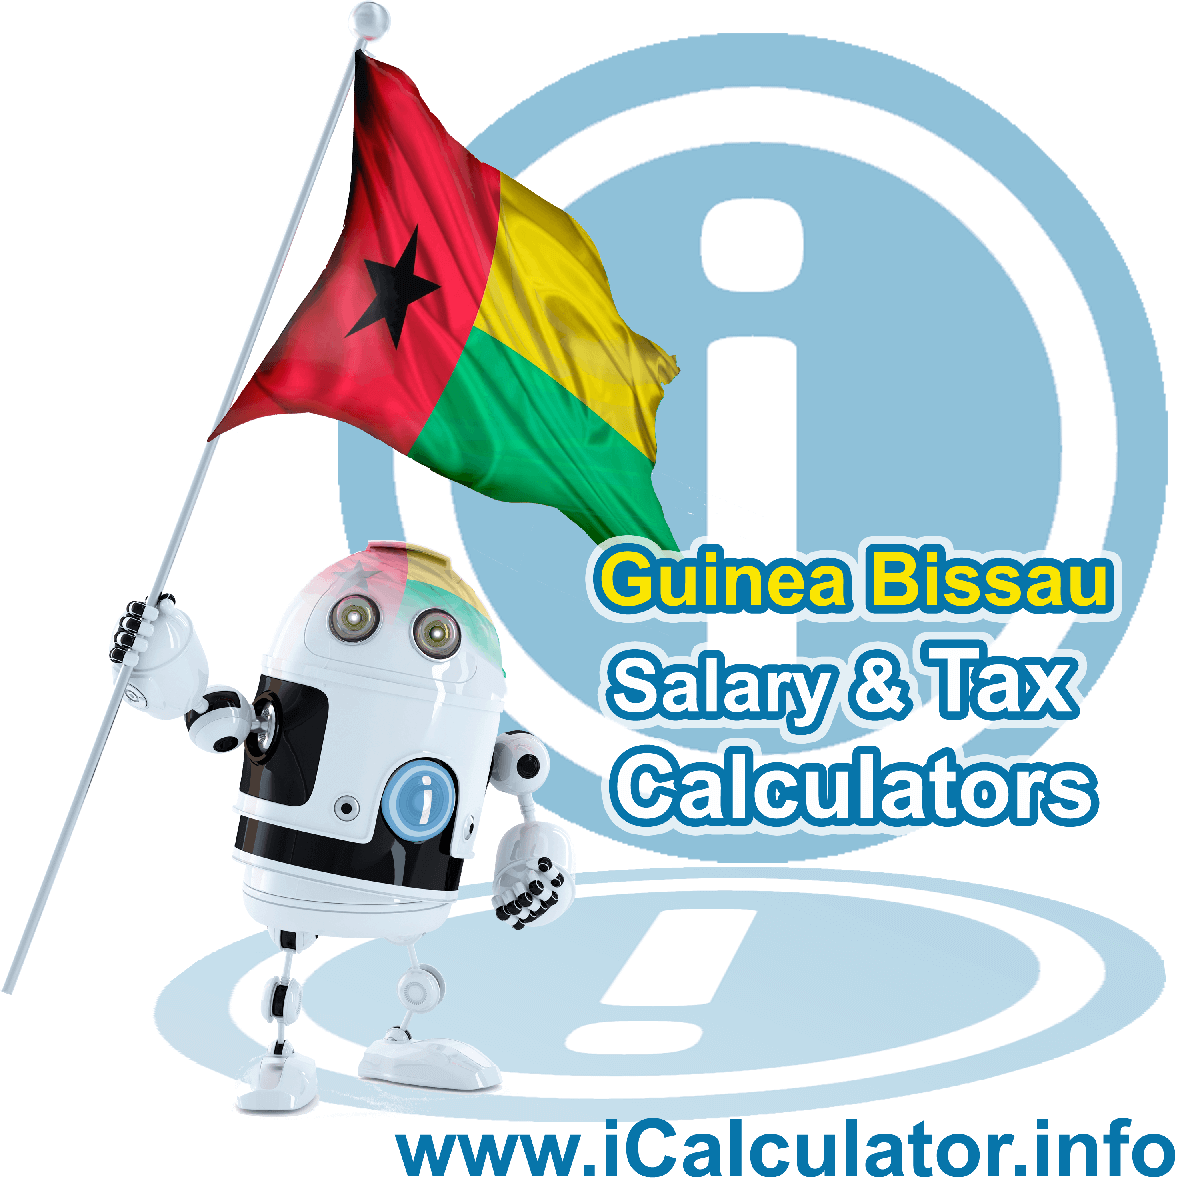 Guinea Bissau Wage Calculator. This image shows the Guinea Bissau flag and information relating to the tax formula for the Guinea Bissau Tax Calculator